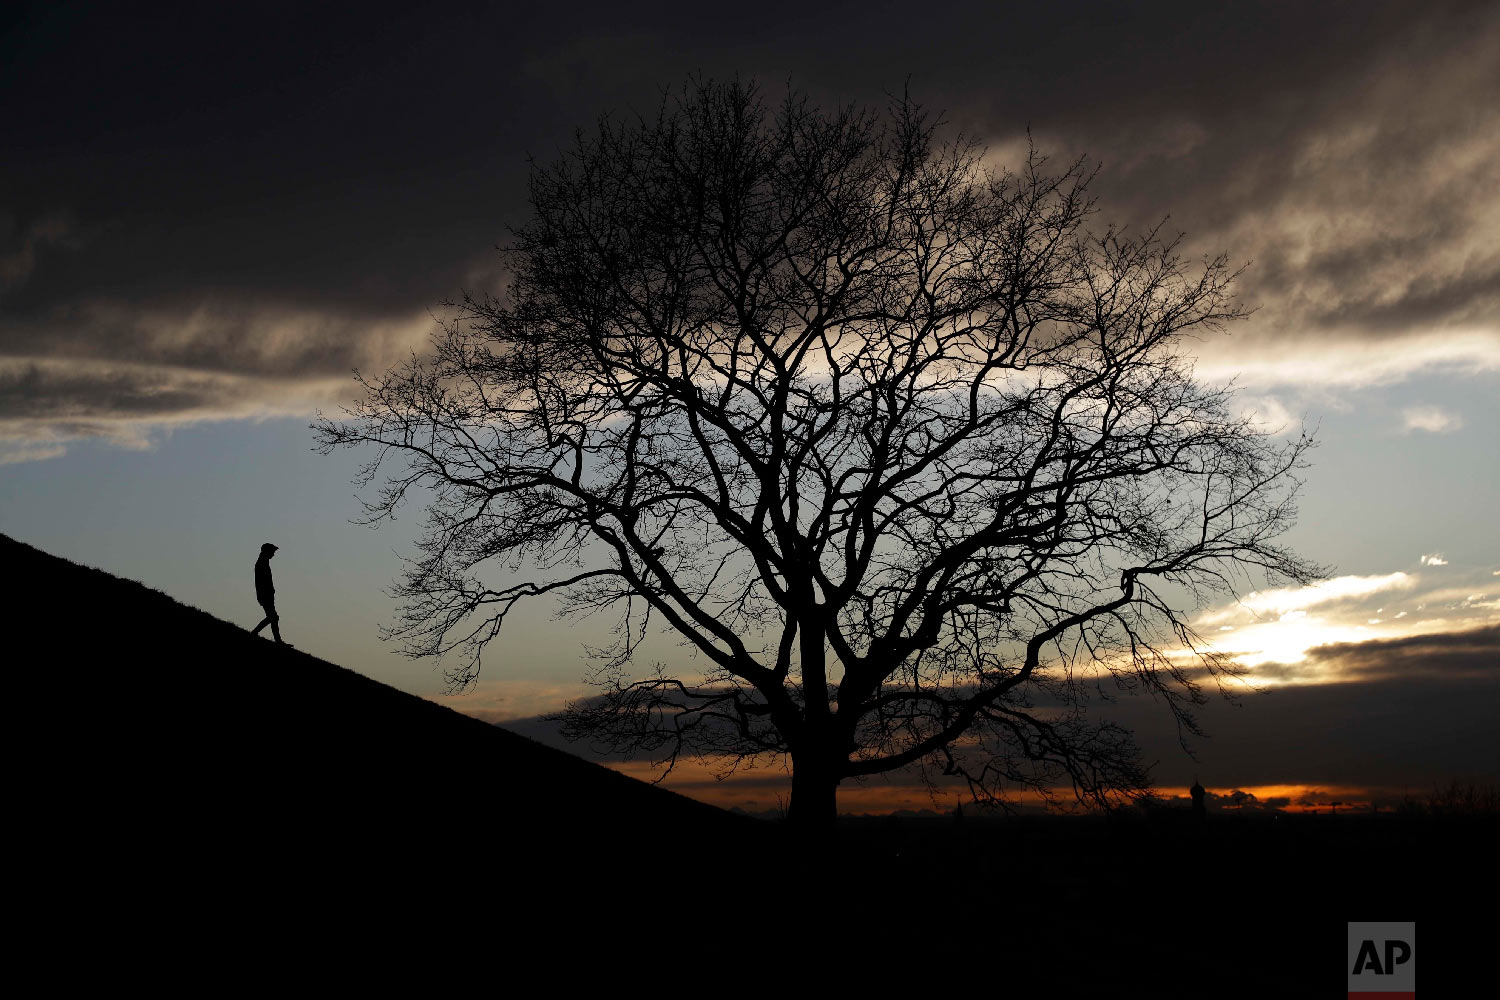  A man passes a tree as he walks down a hill during sun set at the Olympic Park in Munich, Germany on Jan. 9, 2018. (AP Photo/Matthias Schrader) 